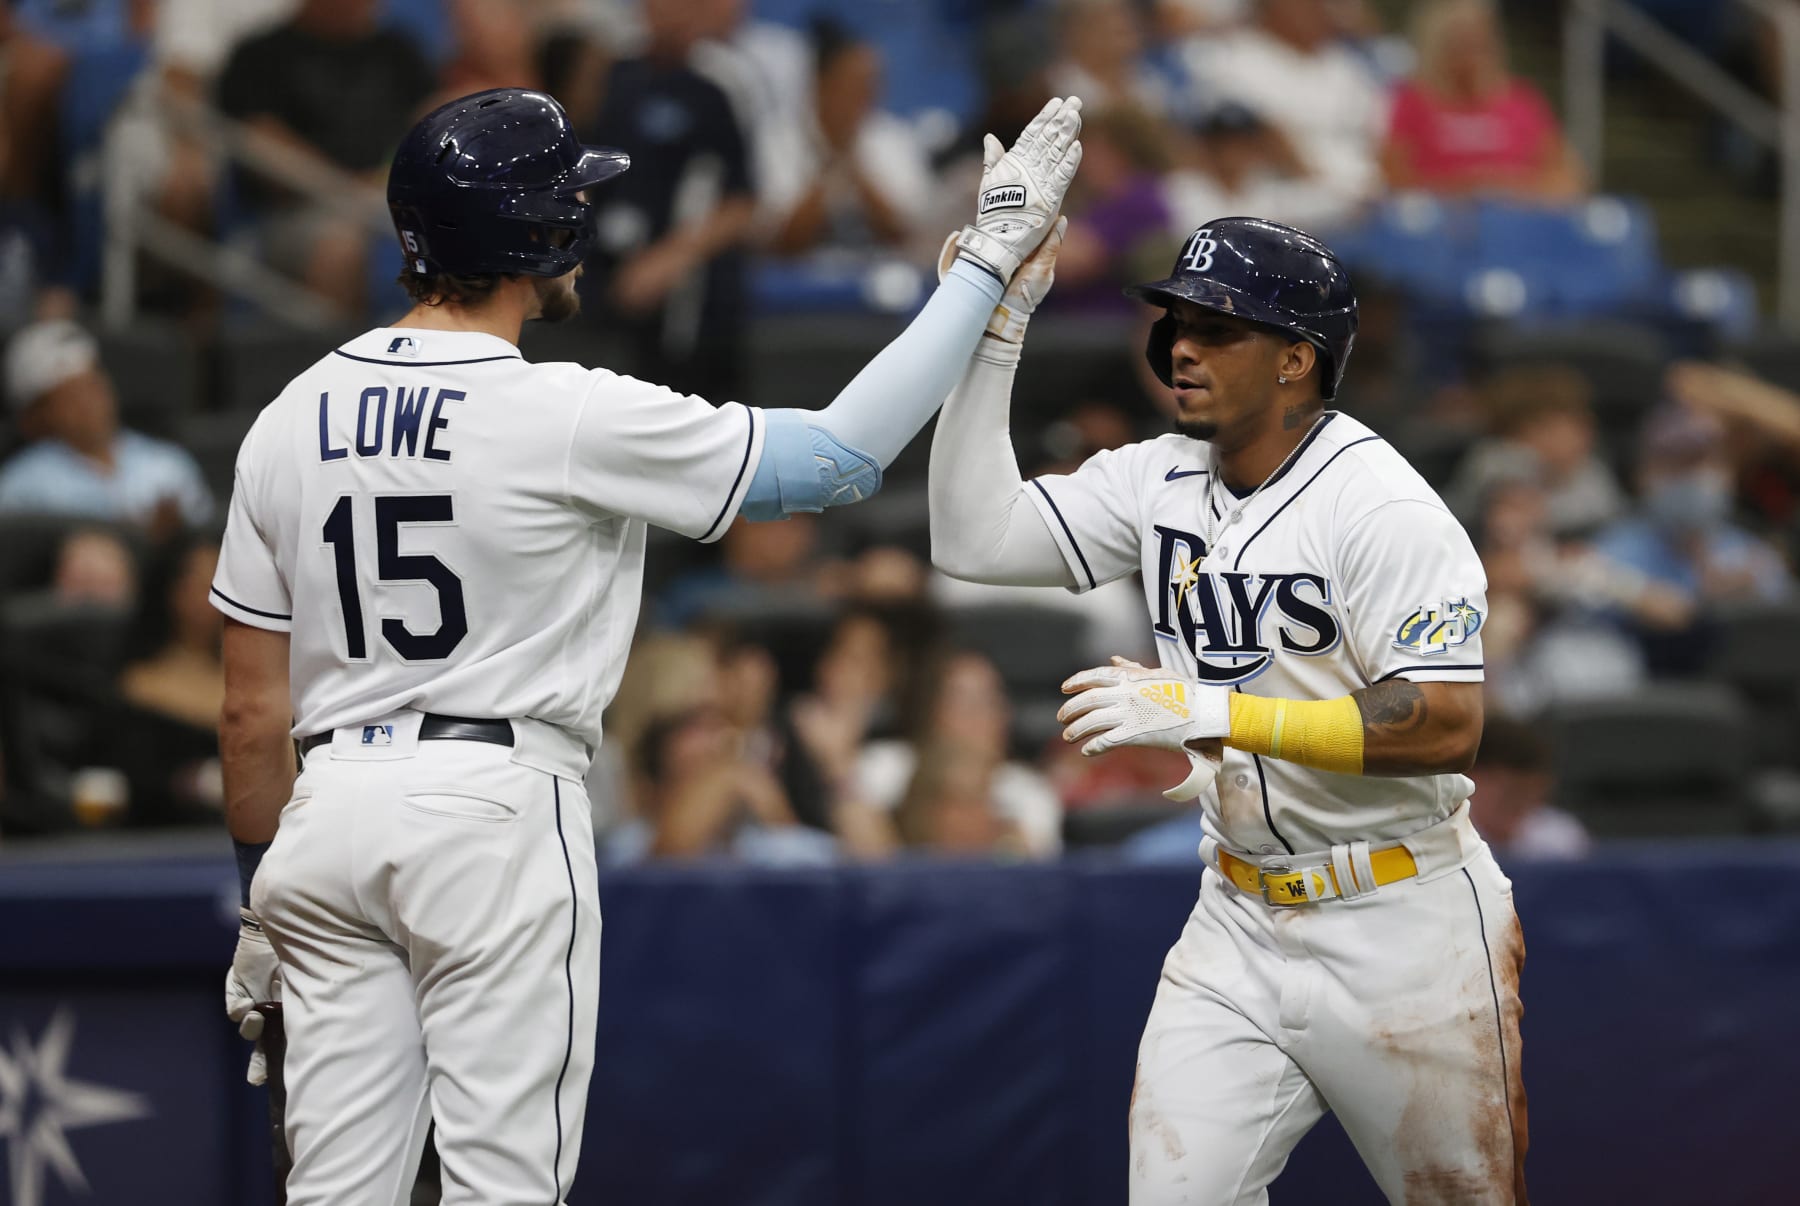 Detroit Tigers lose to Tampa Bay Rays, 10-6, on early rough innings